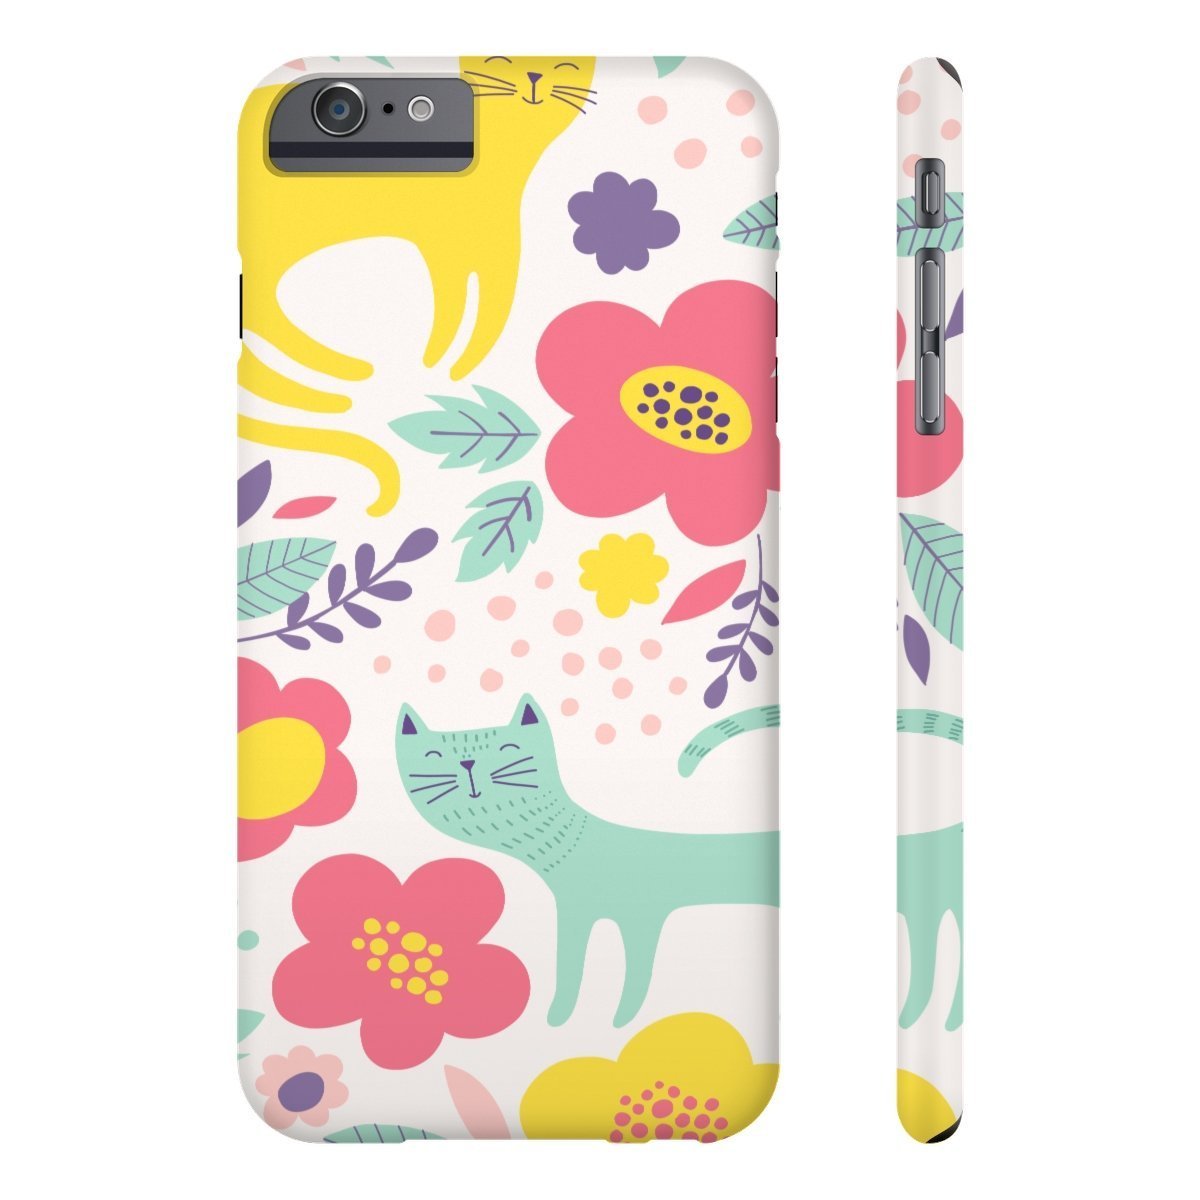 Cute Things for Cat Lovers, Cat Phone Case Printed with Colorful Cats and Flowers